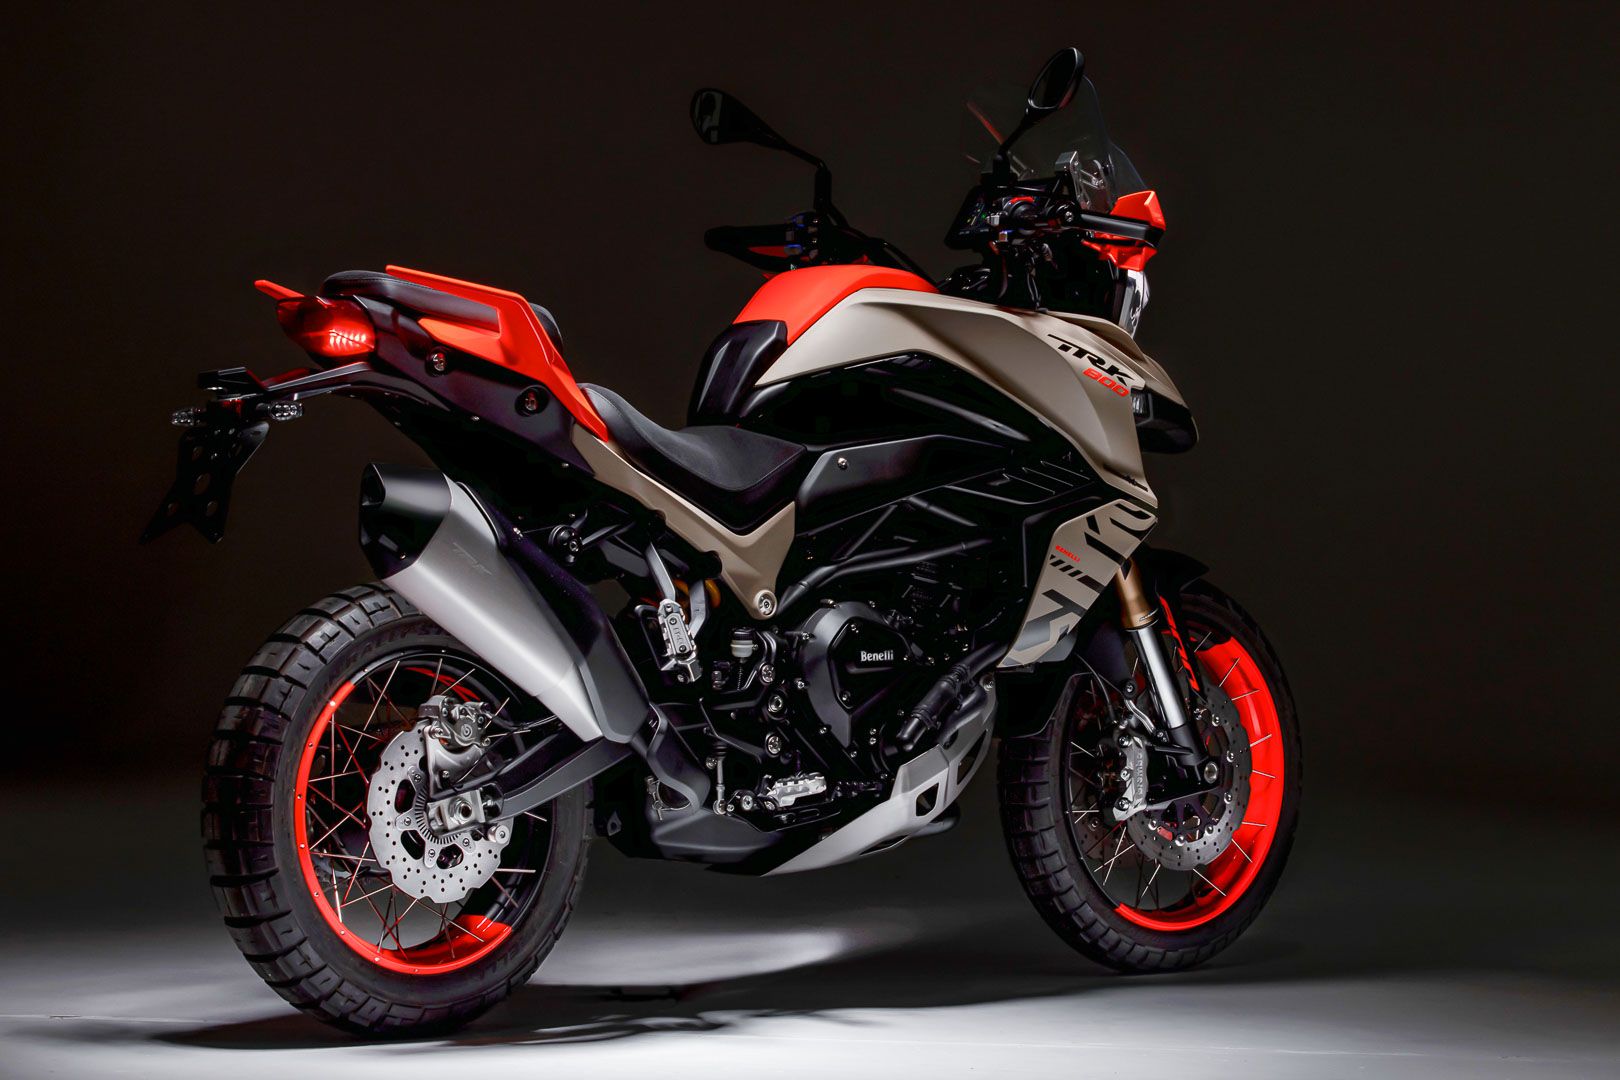 2022-benelli-trk-800-first-look-adventure-sport-touring-motorcycle-10